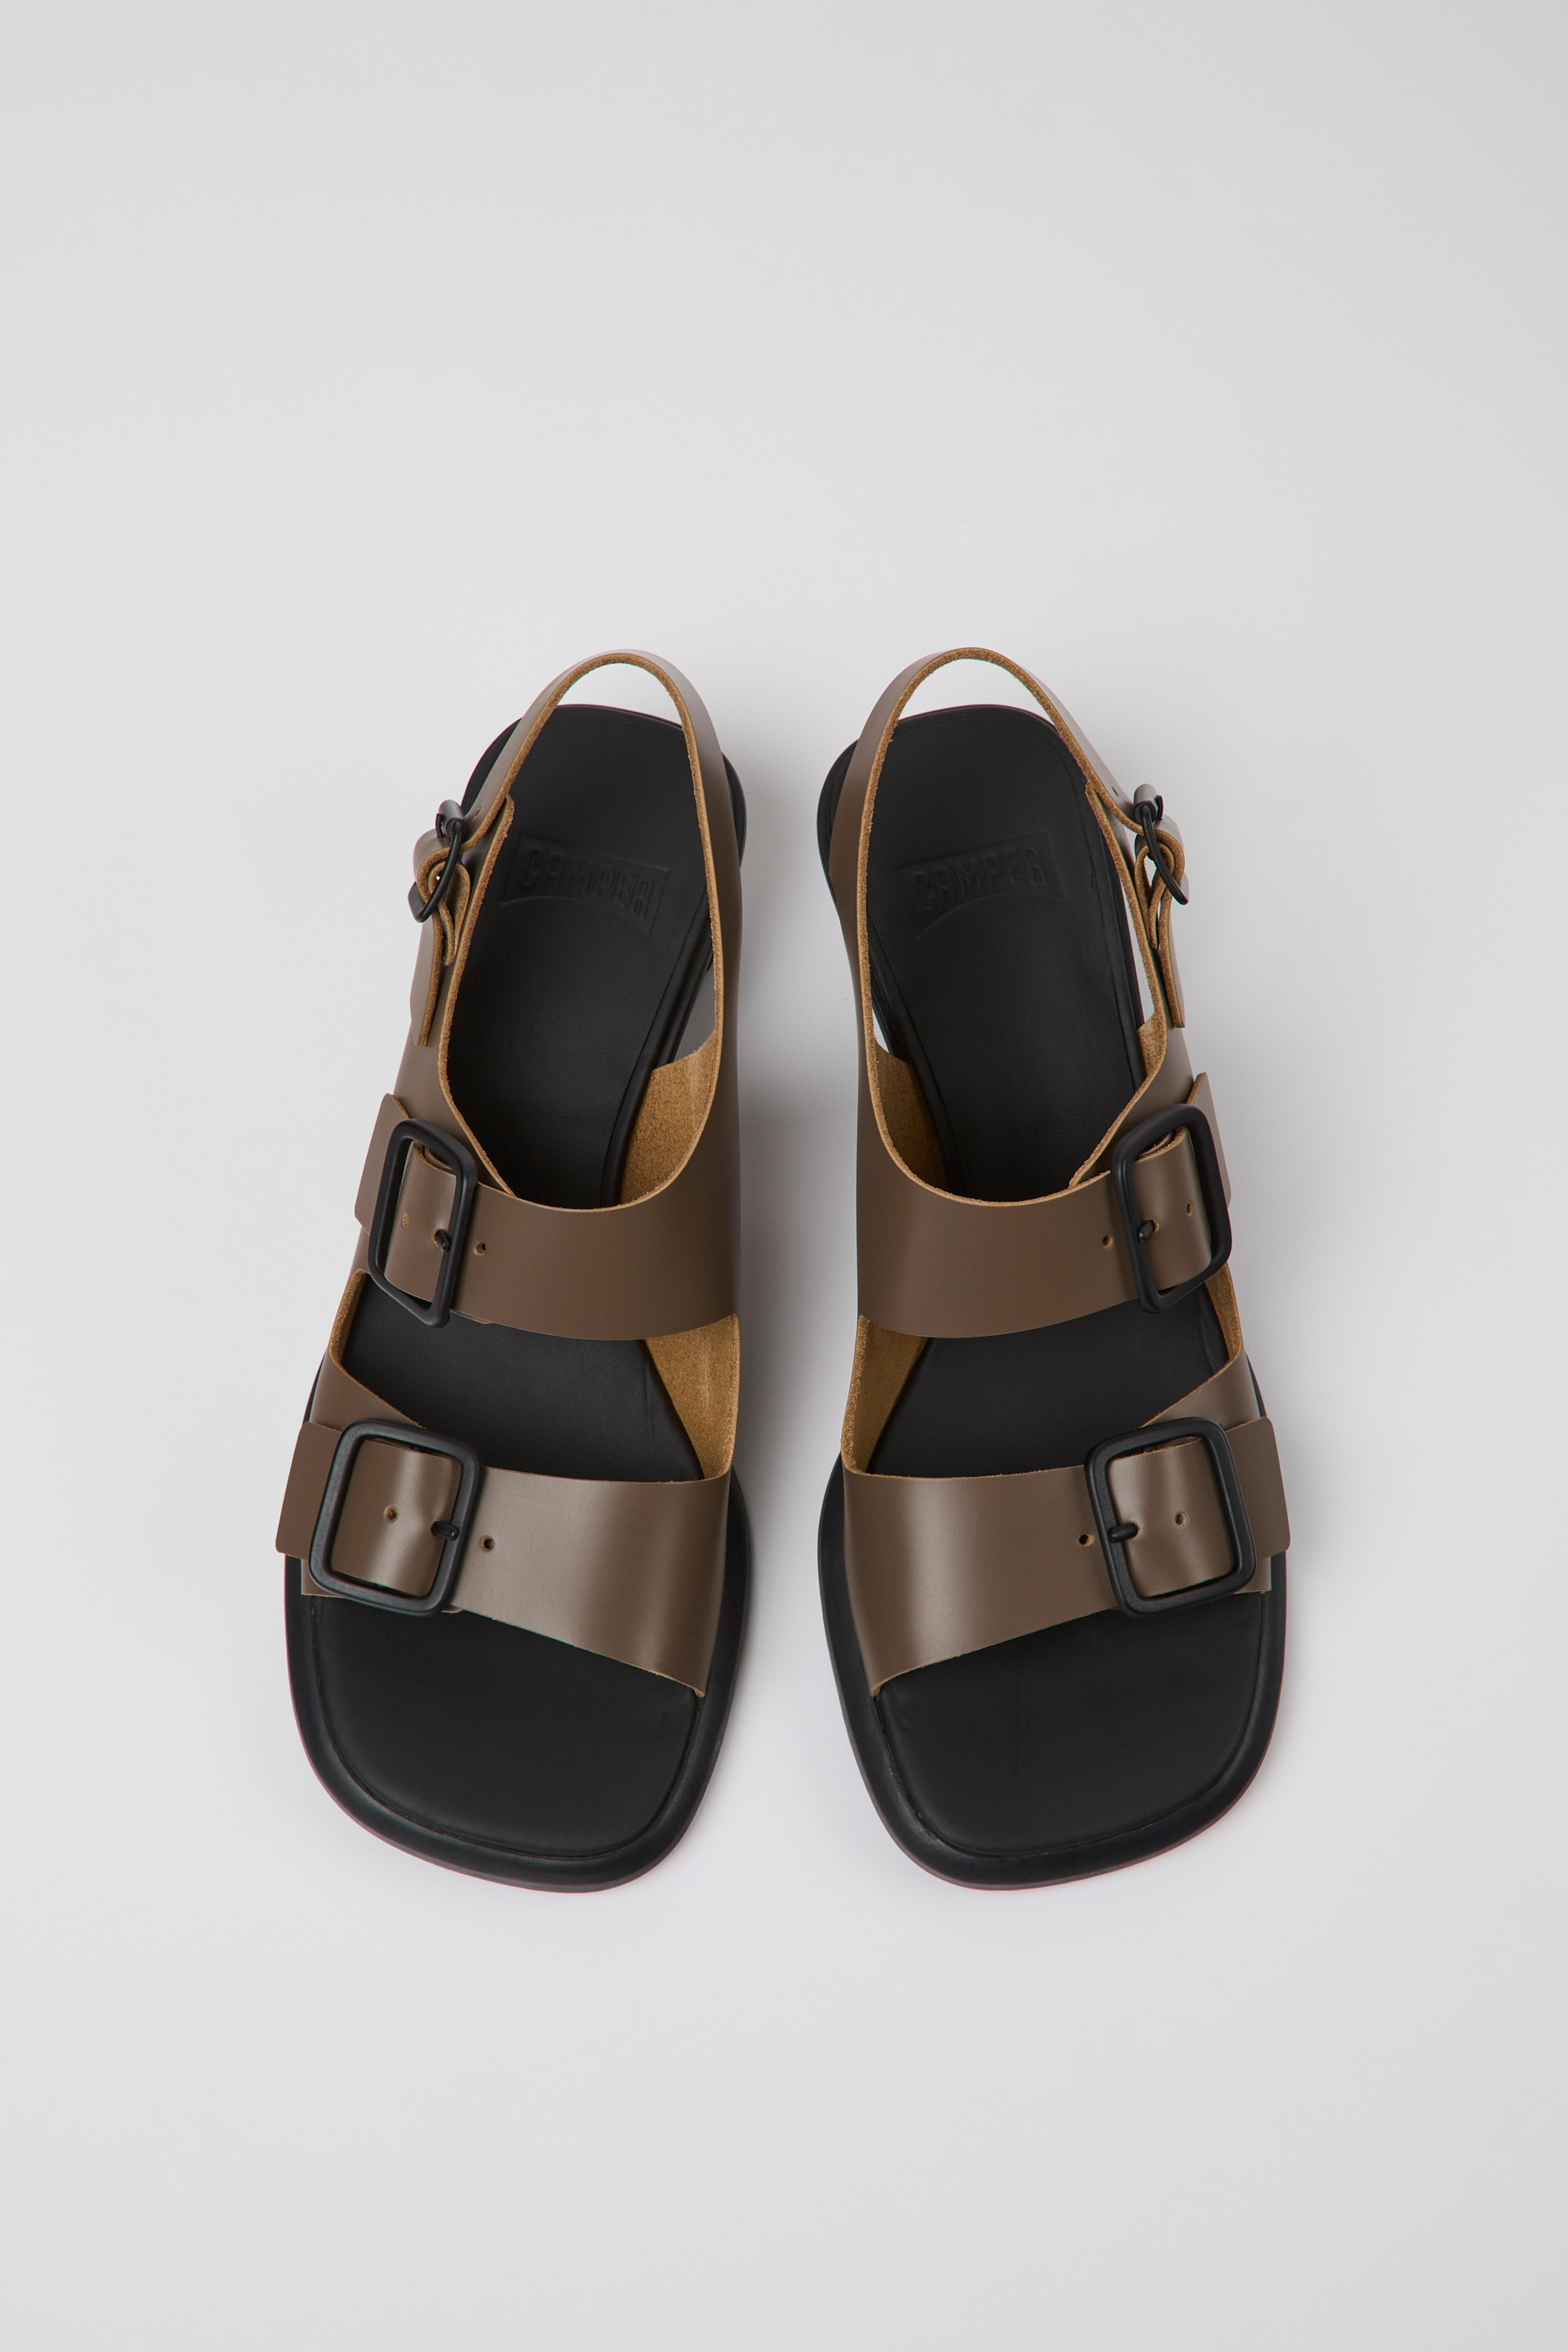 Dina Pink Sandals for Women - Autumn/Winter collection - Camper